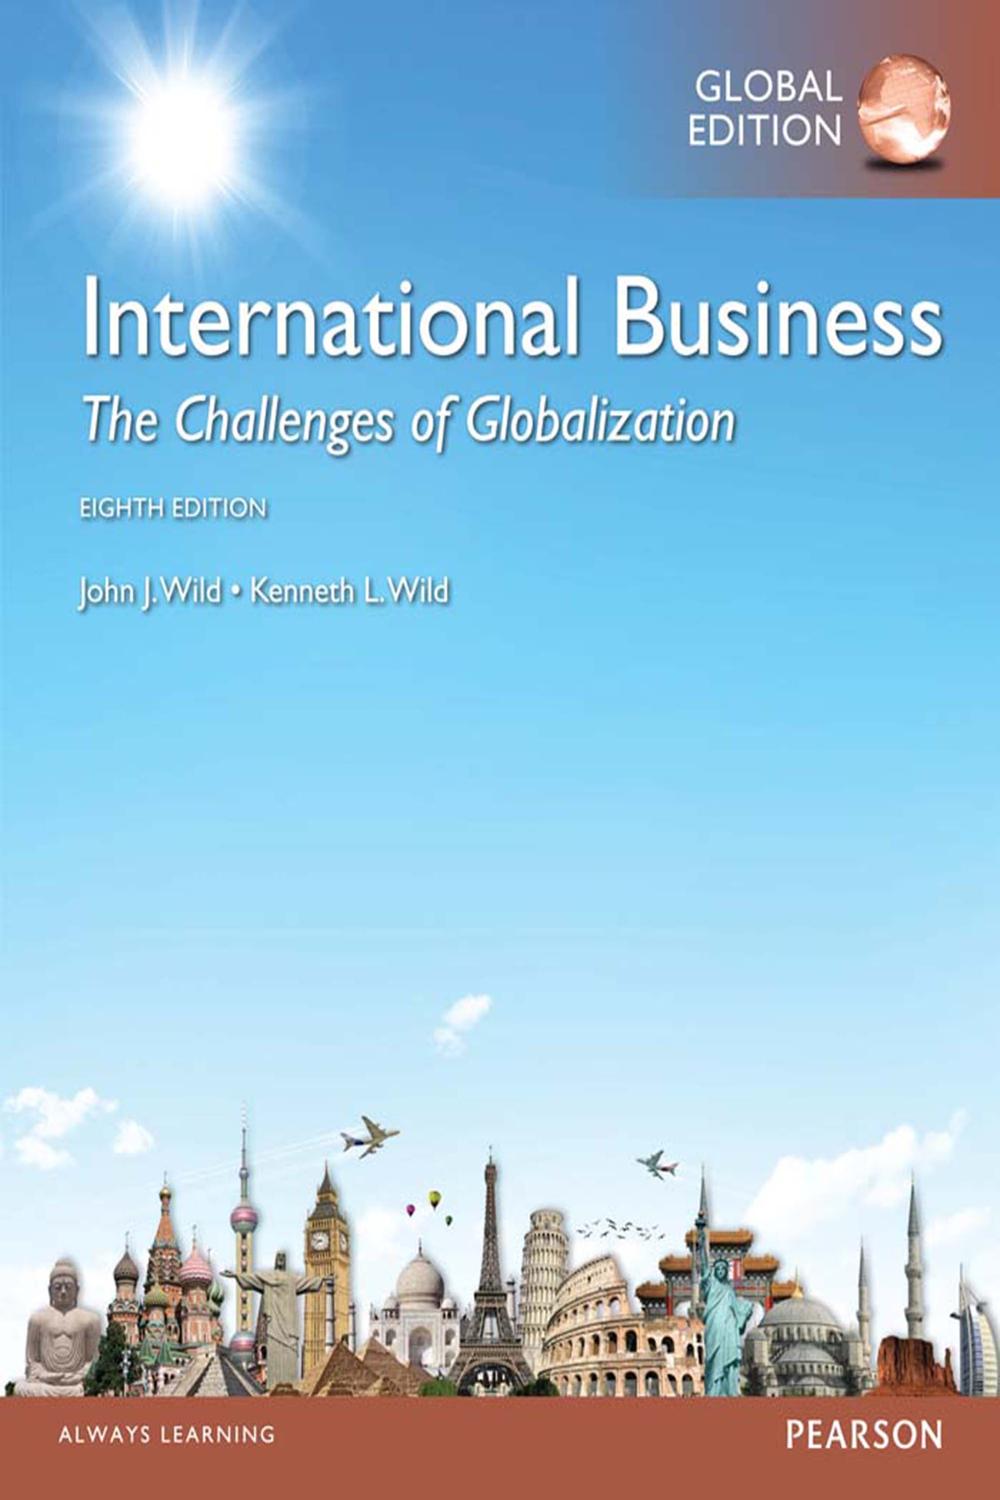 International business the challenges of globalization 7th edition pdf download ms office free download for windows 10 with product key